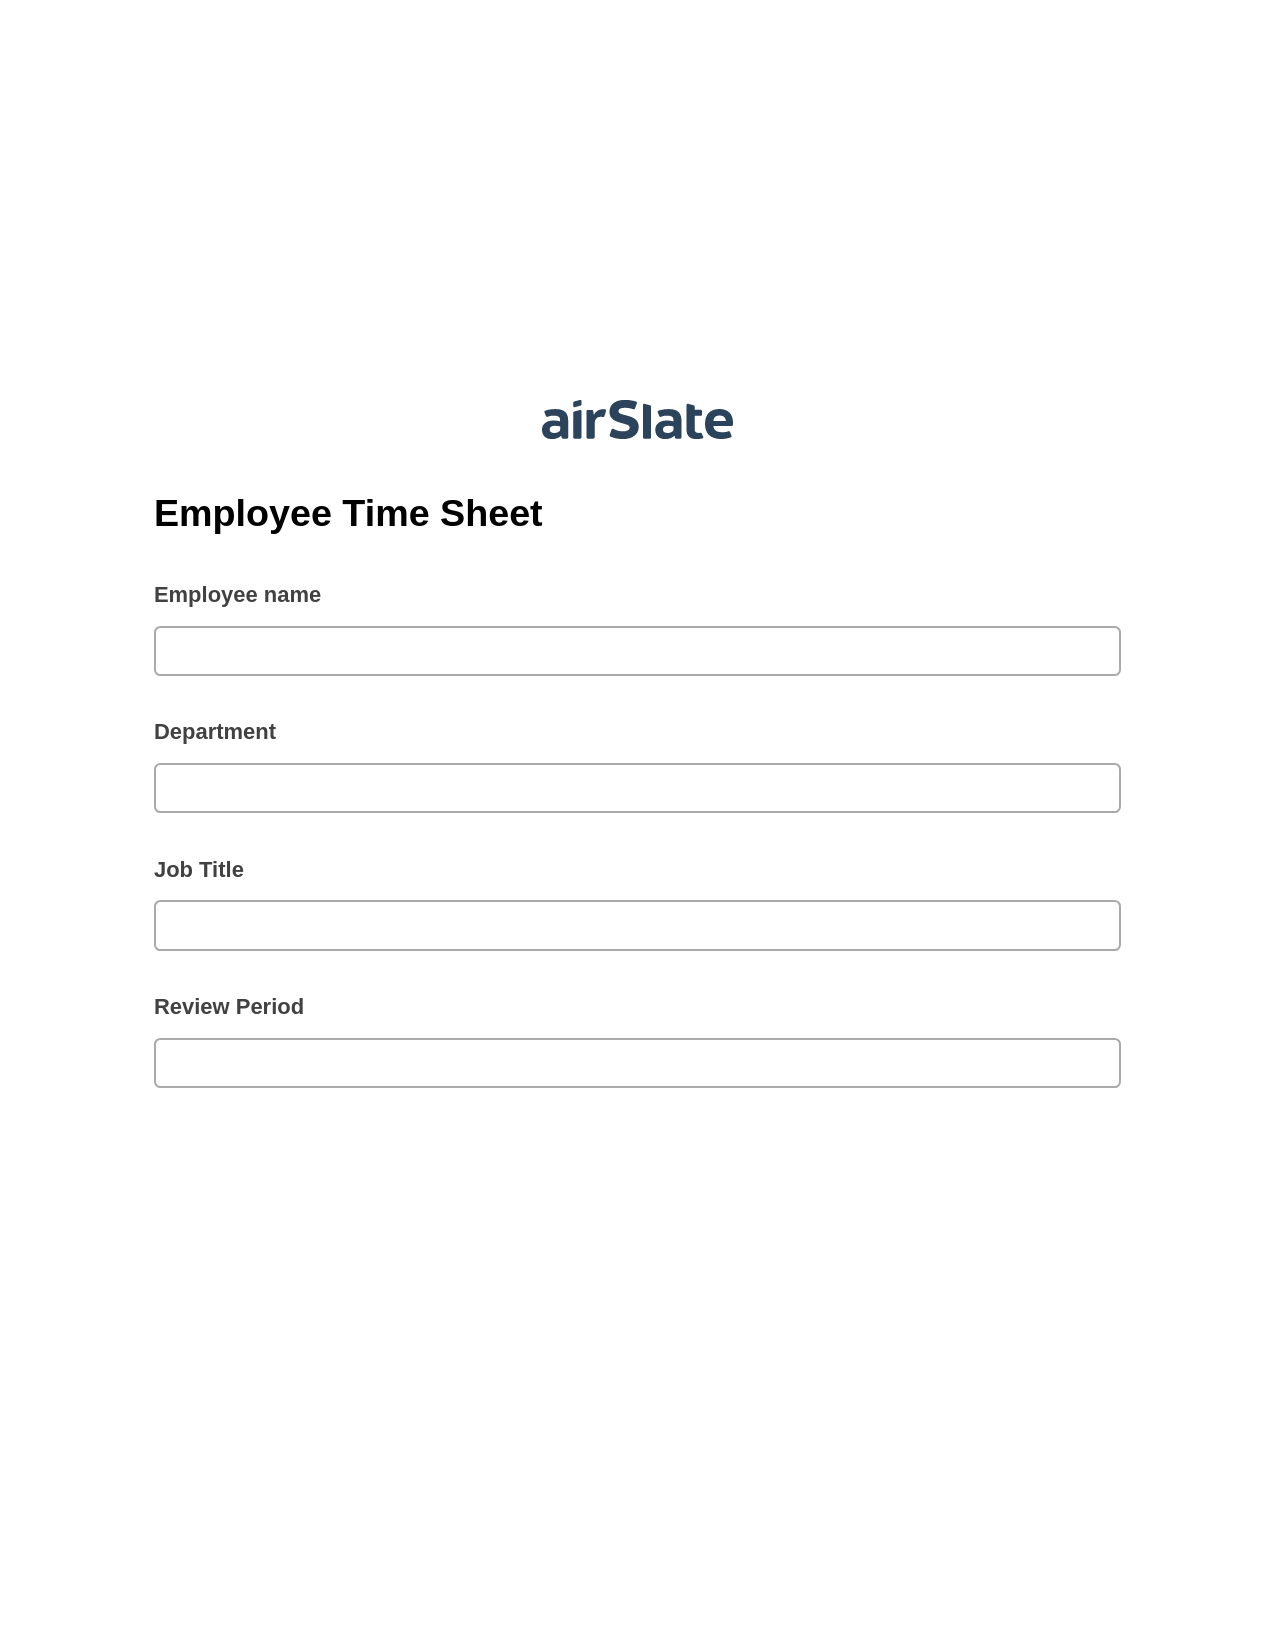 Multirole Employee Time Sheet Pre-fill from another Slate Bot, Update Audit Trail Bot, Post-finish Document Bot